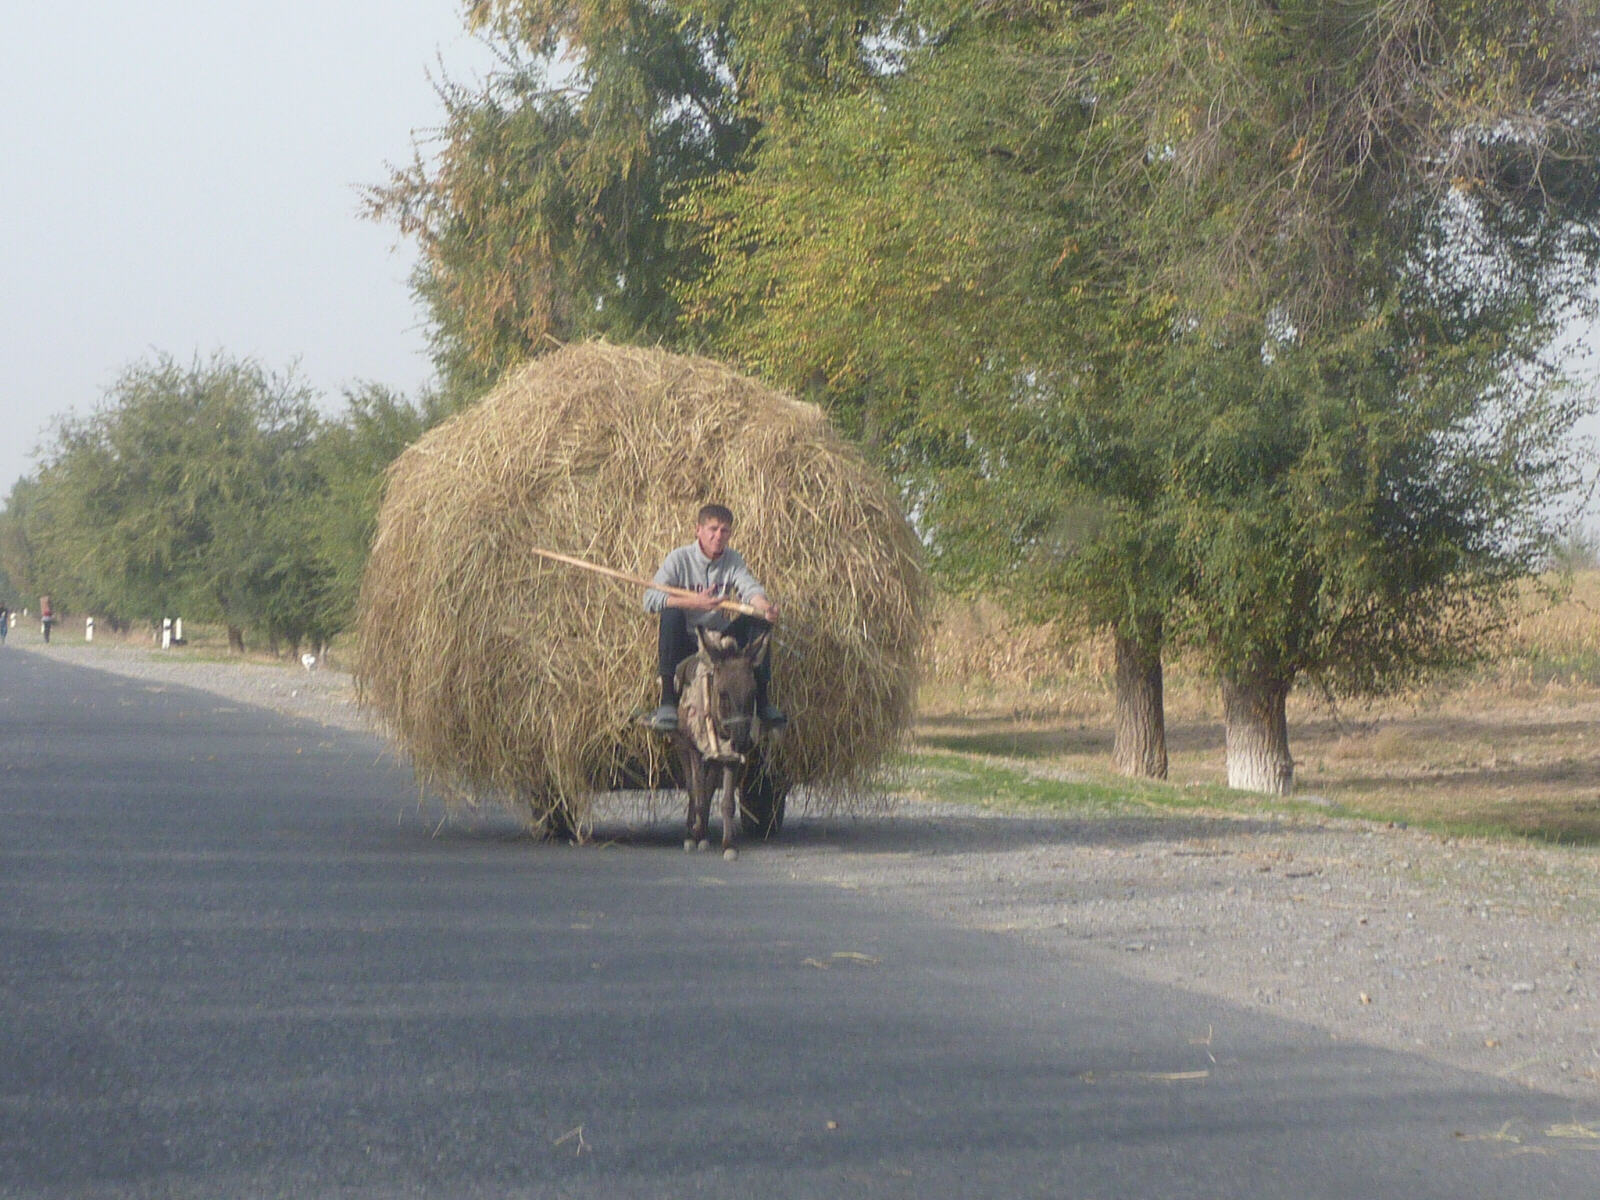 A hay cart on the road in Central Asia